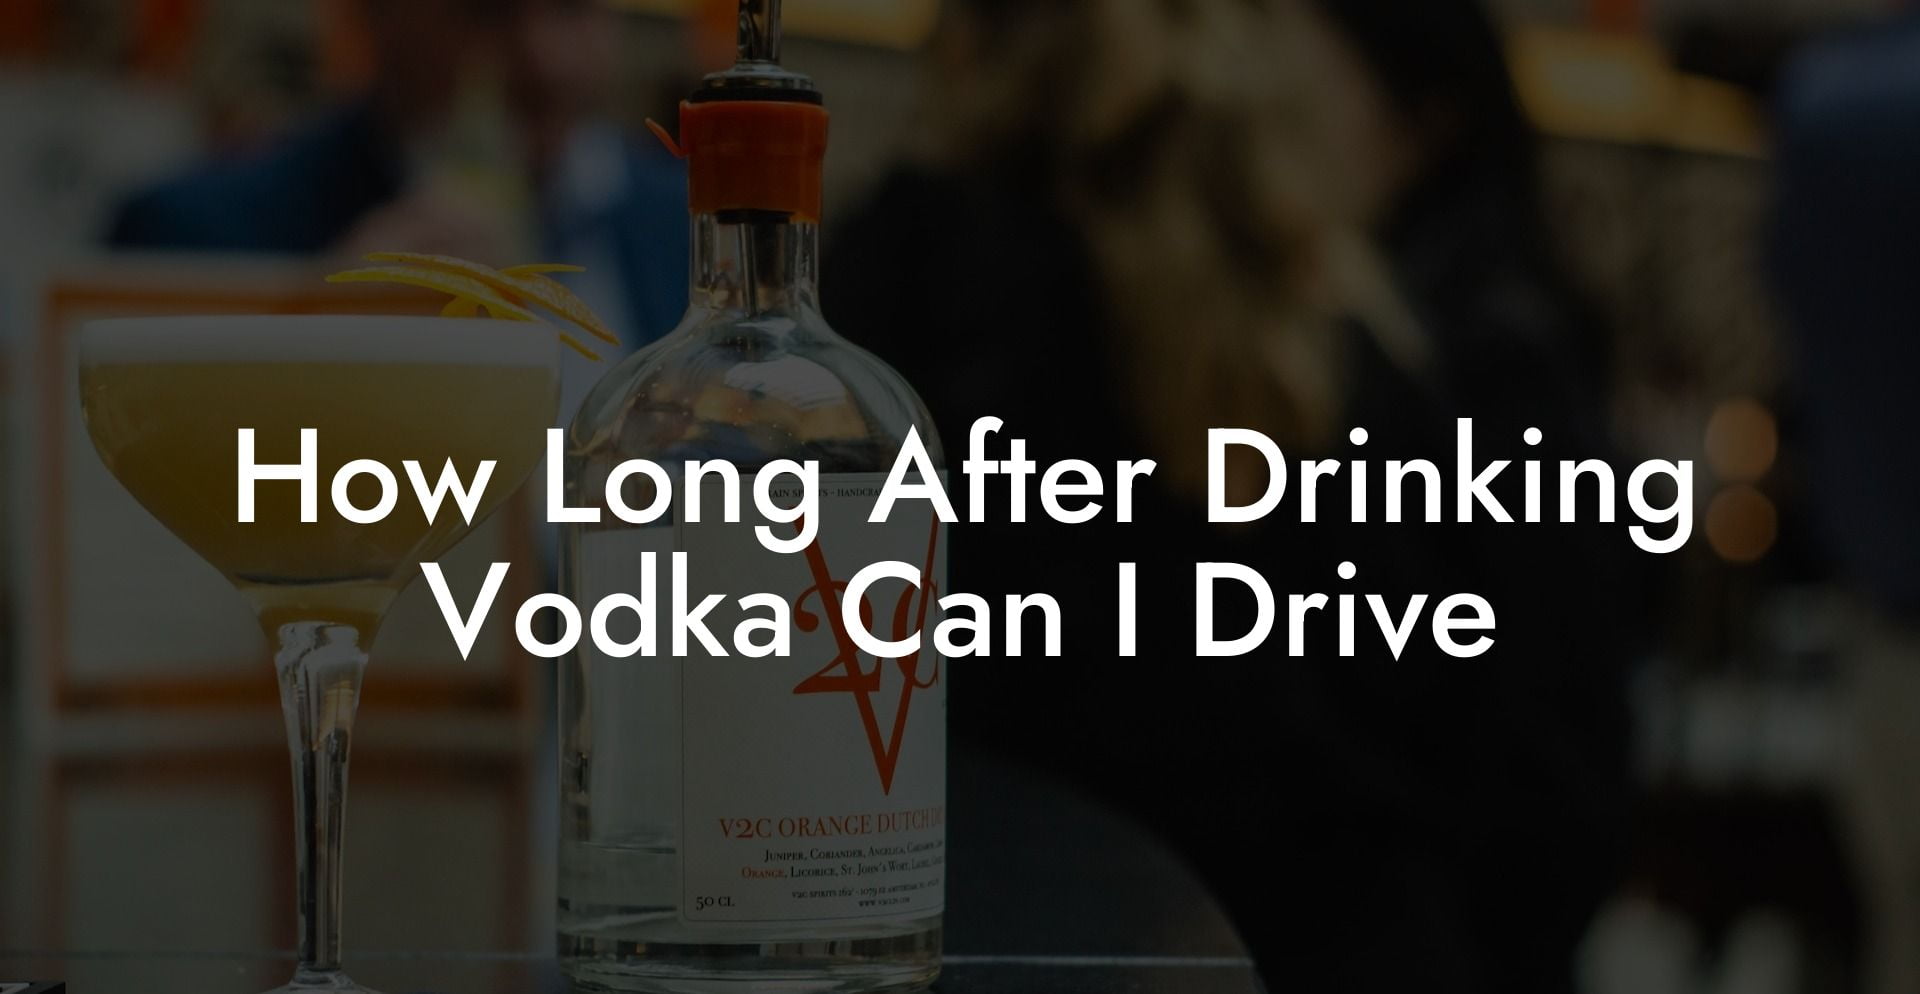 How Long After Drinking Vodka Can I Drive